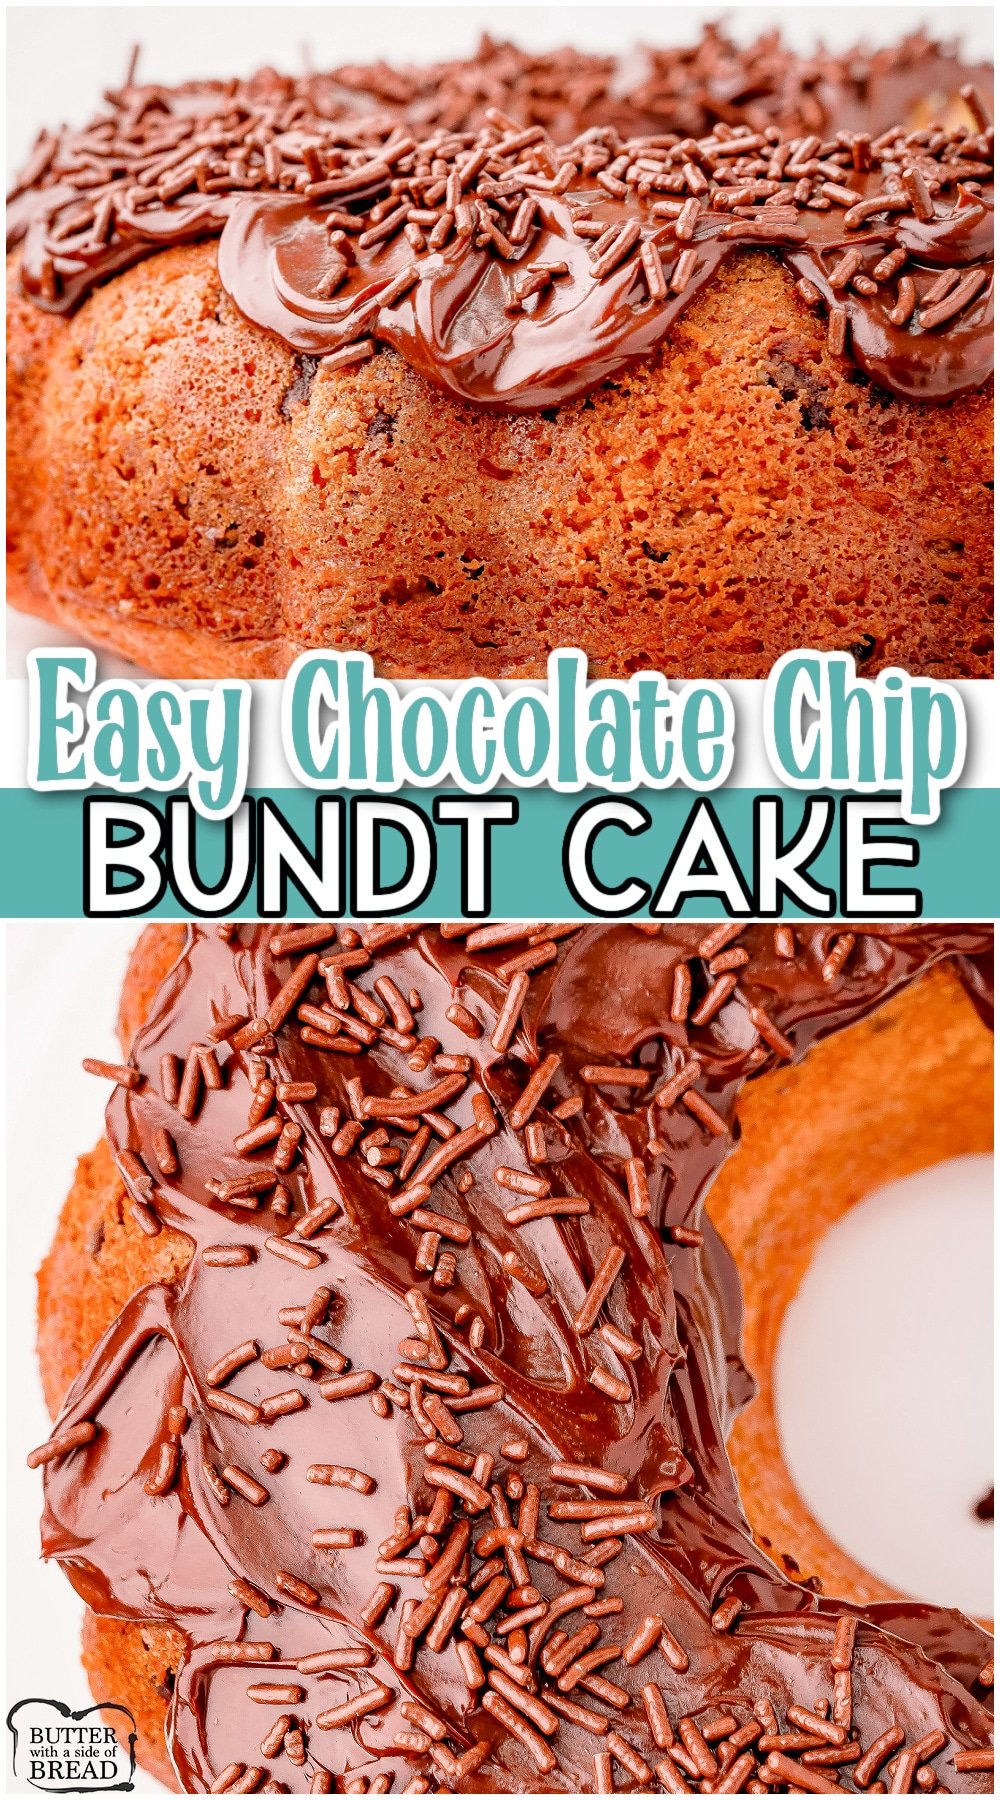 Easy Chocolate Chip Bundt Cake recipe with simple ingredients & show stopping results! Starts with a cake mix & is topped with a fabulous chocolate ganache that everyone loves!